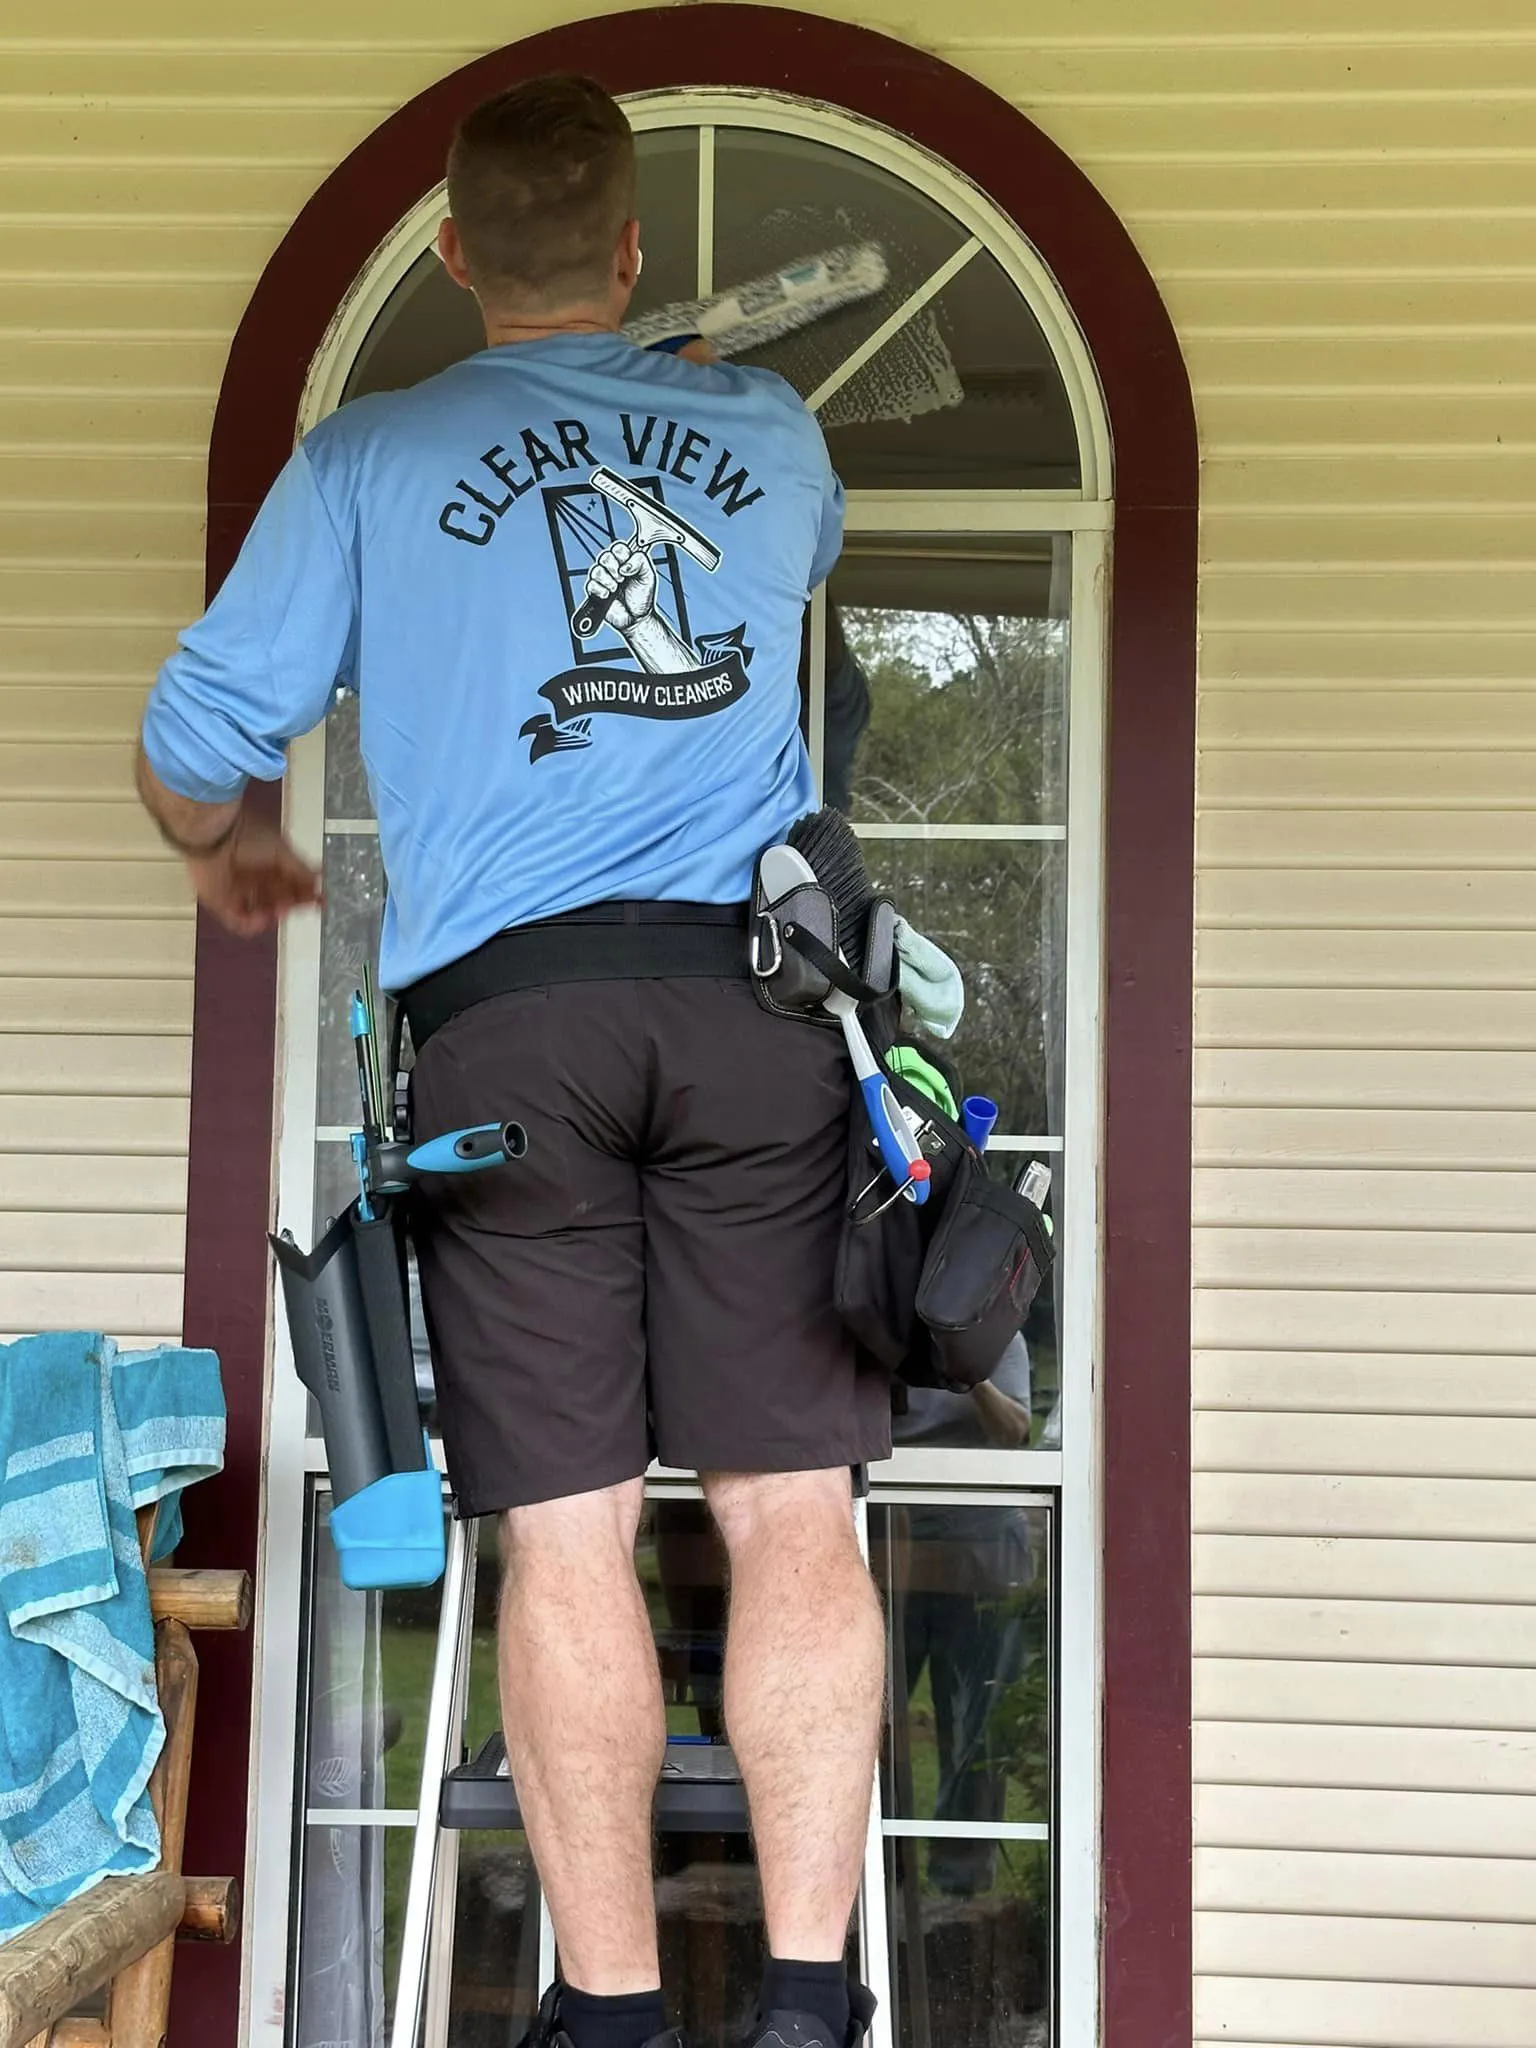 Clean View window cleaning company is performing window washing in Nacogdoches, TX.